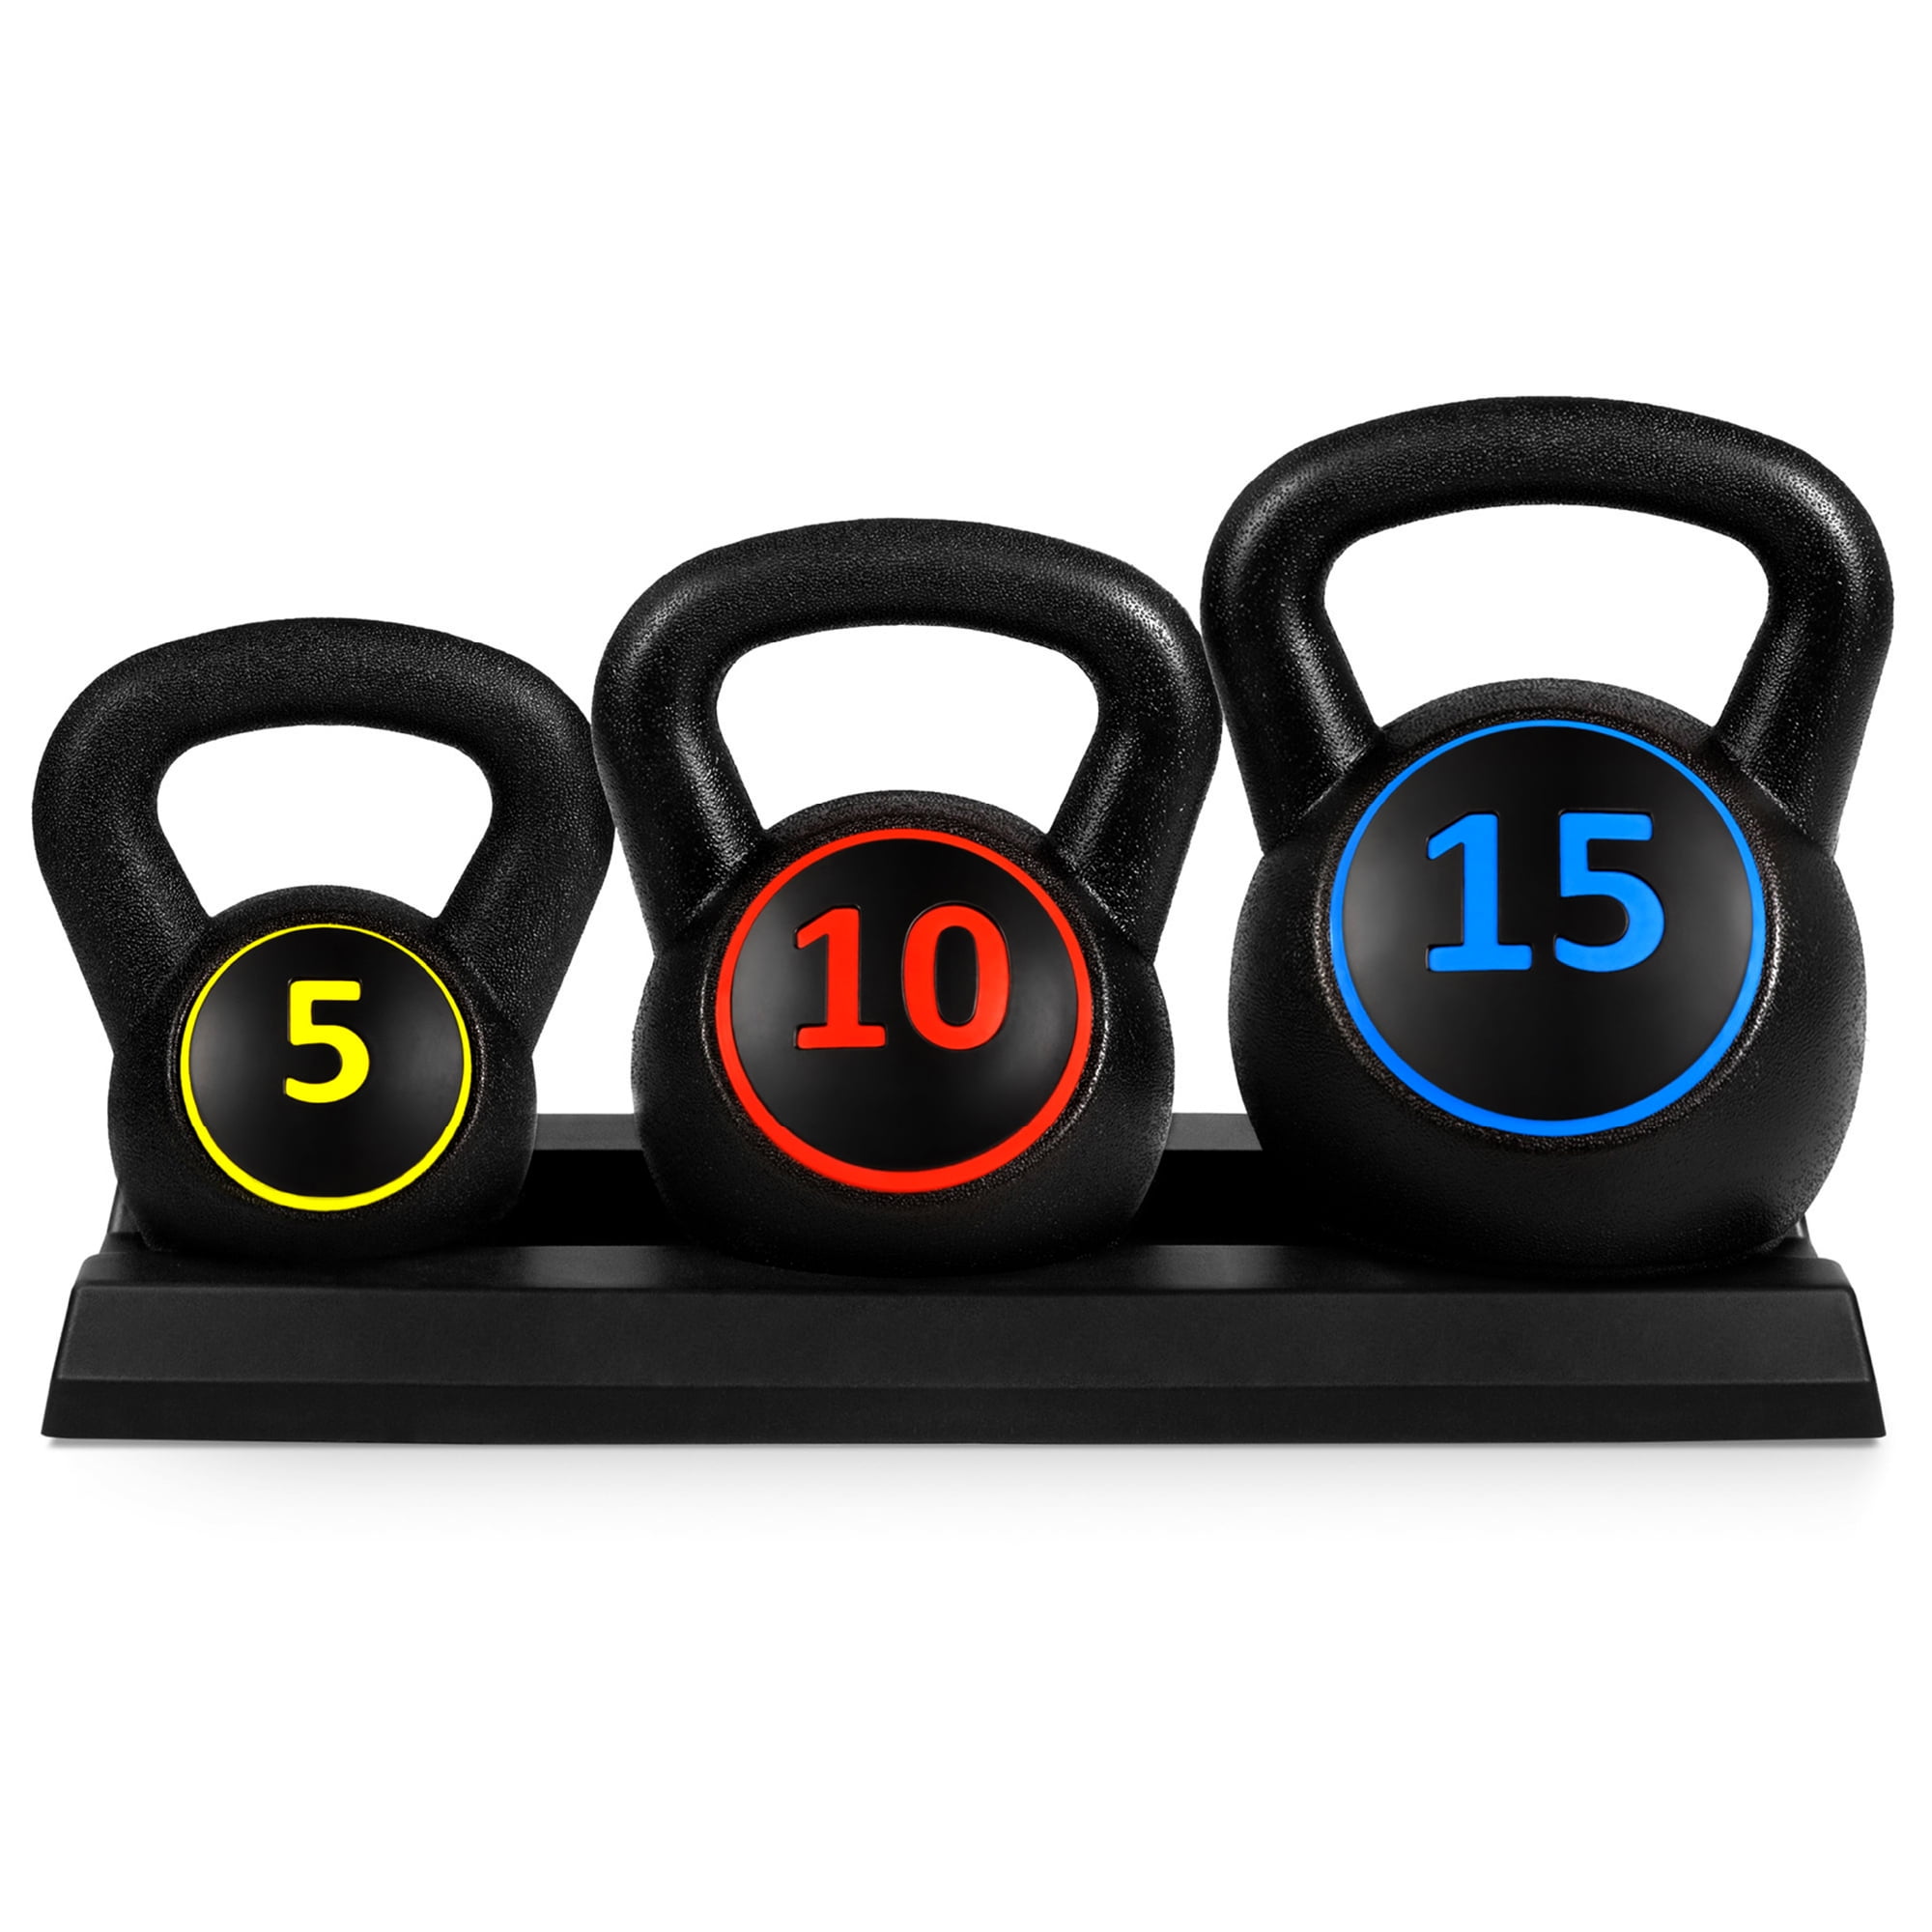 Ezone Kettlebell Set with Storage Rack 3-Piece Exercise Fitness Concrete Weights HDPE Coated Concrete Weights 5LB 15LB 10LB